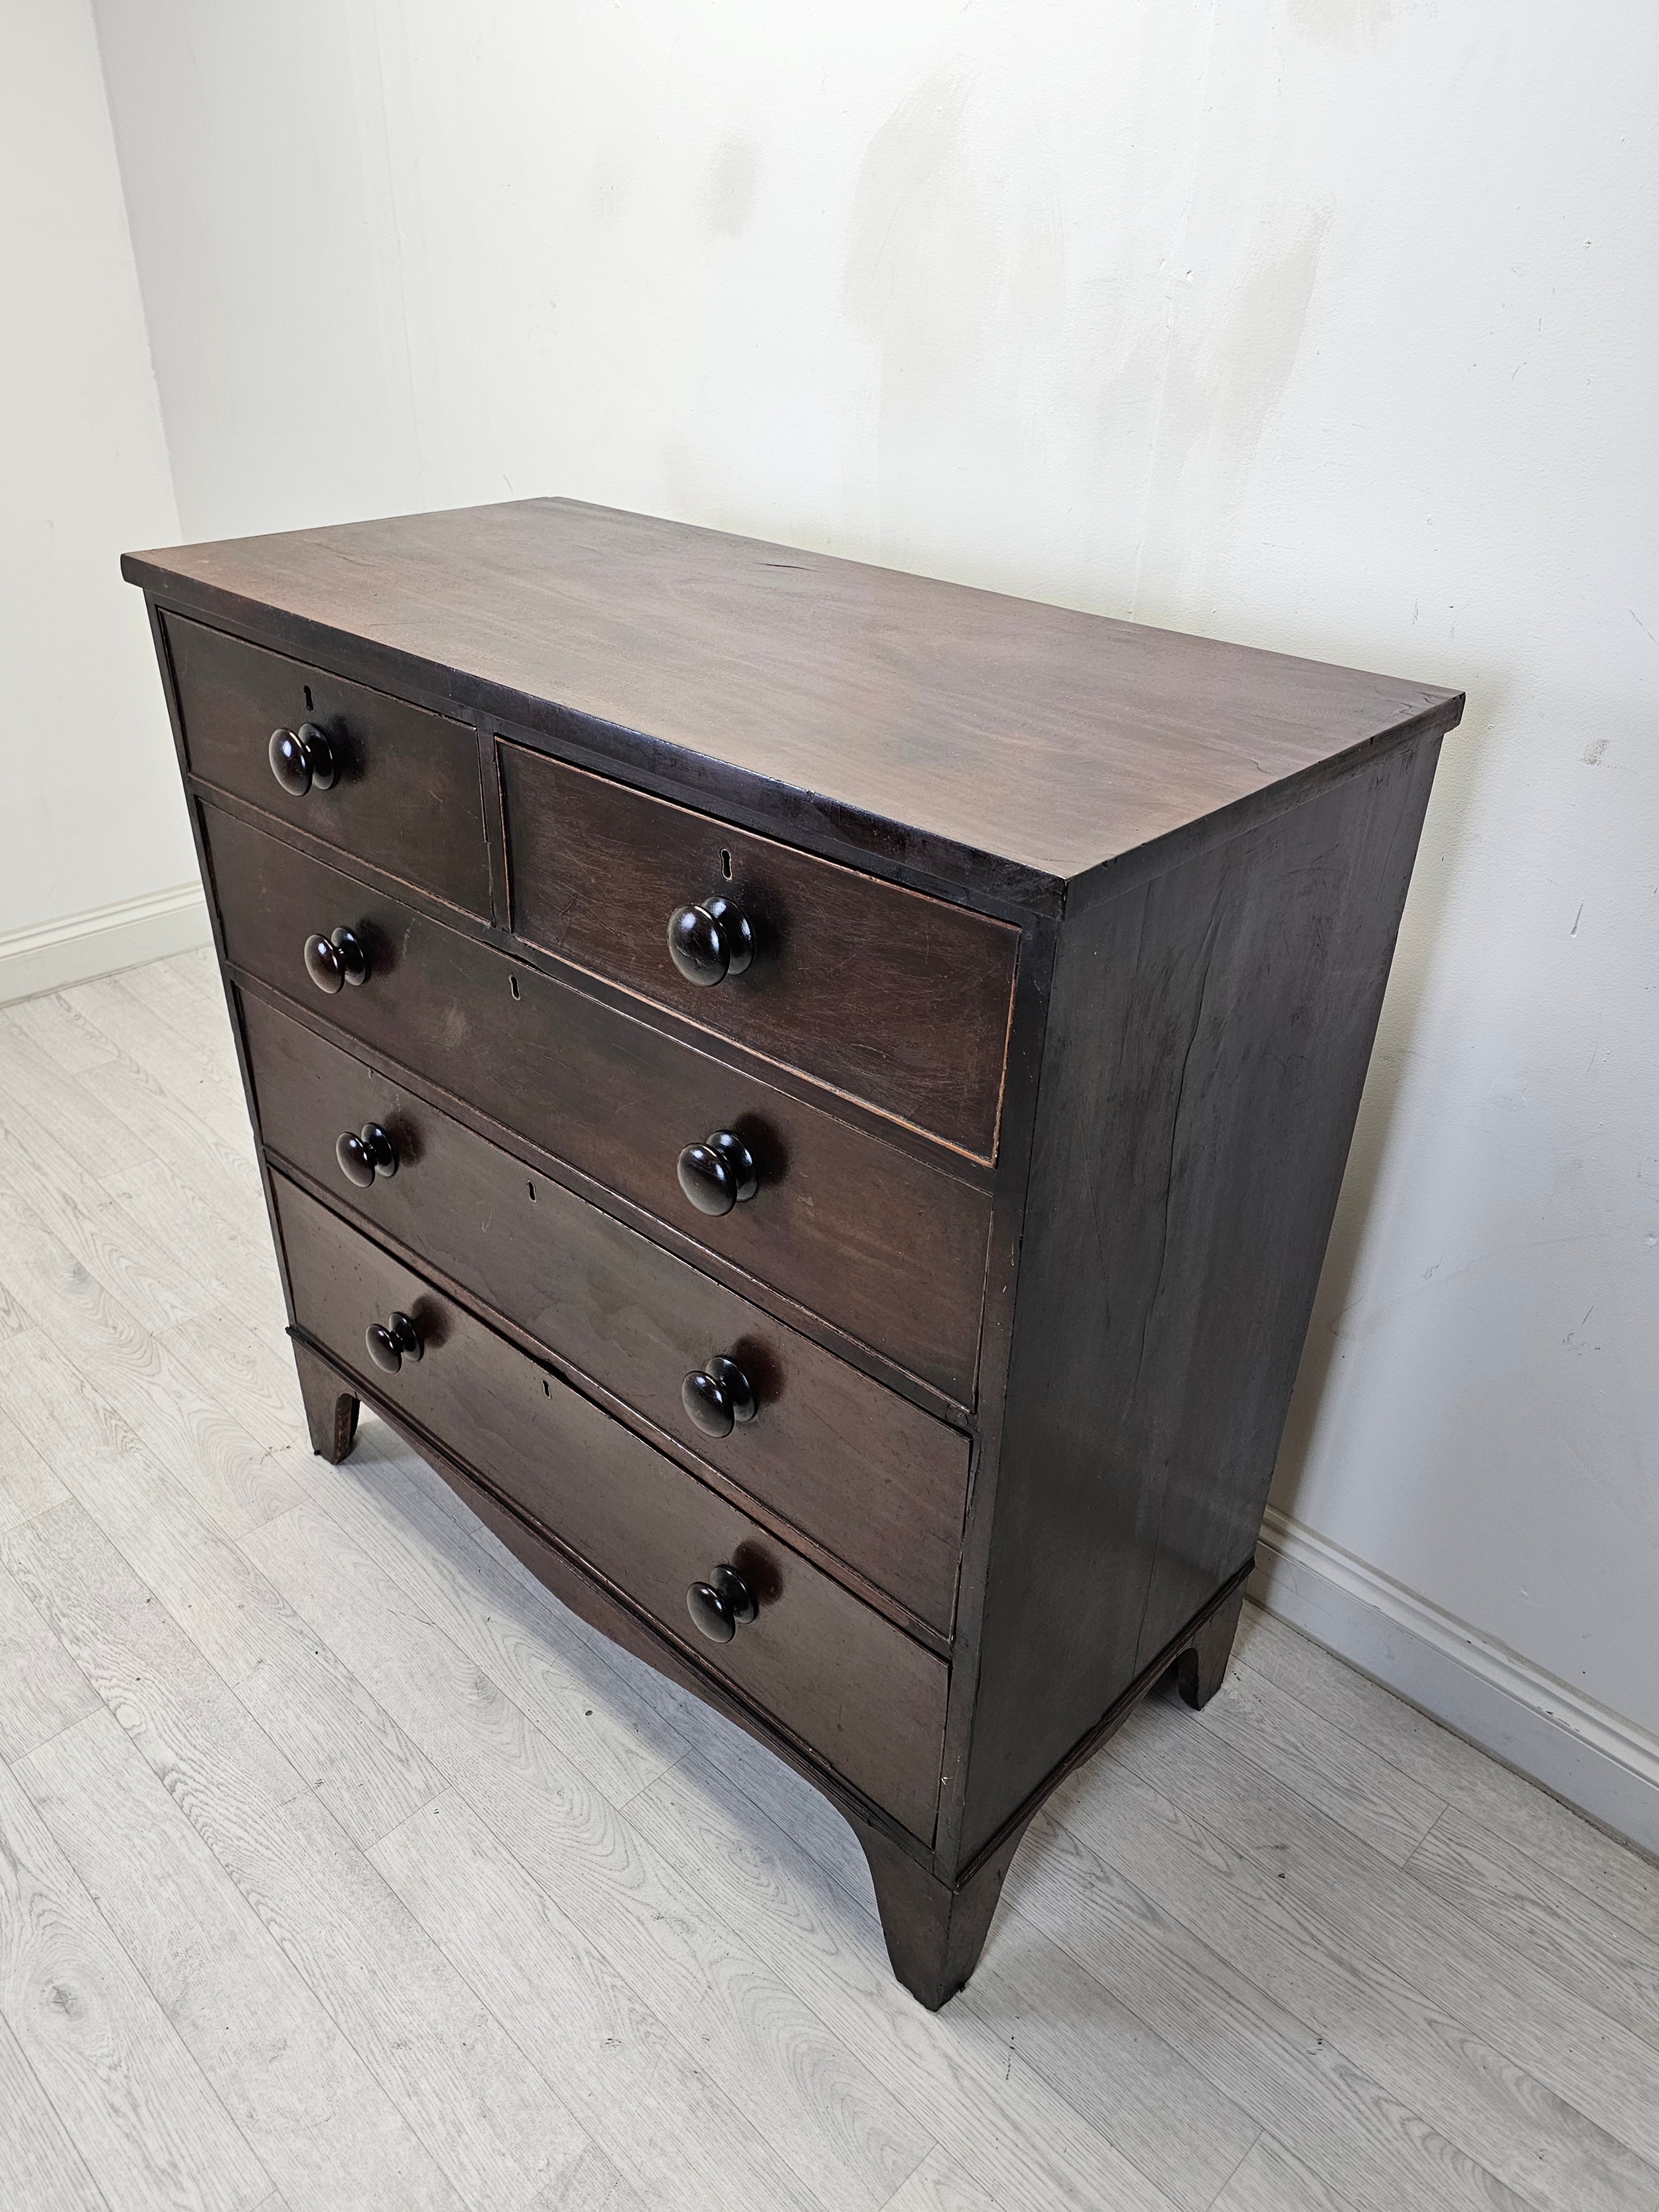 Chest of drawers, early 19th century mahogany. H.108 W.103 D.50cm. - Image 2 of 4